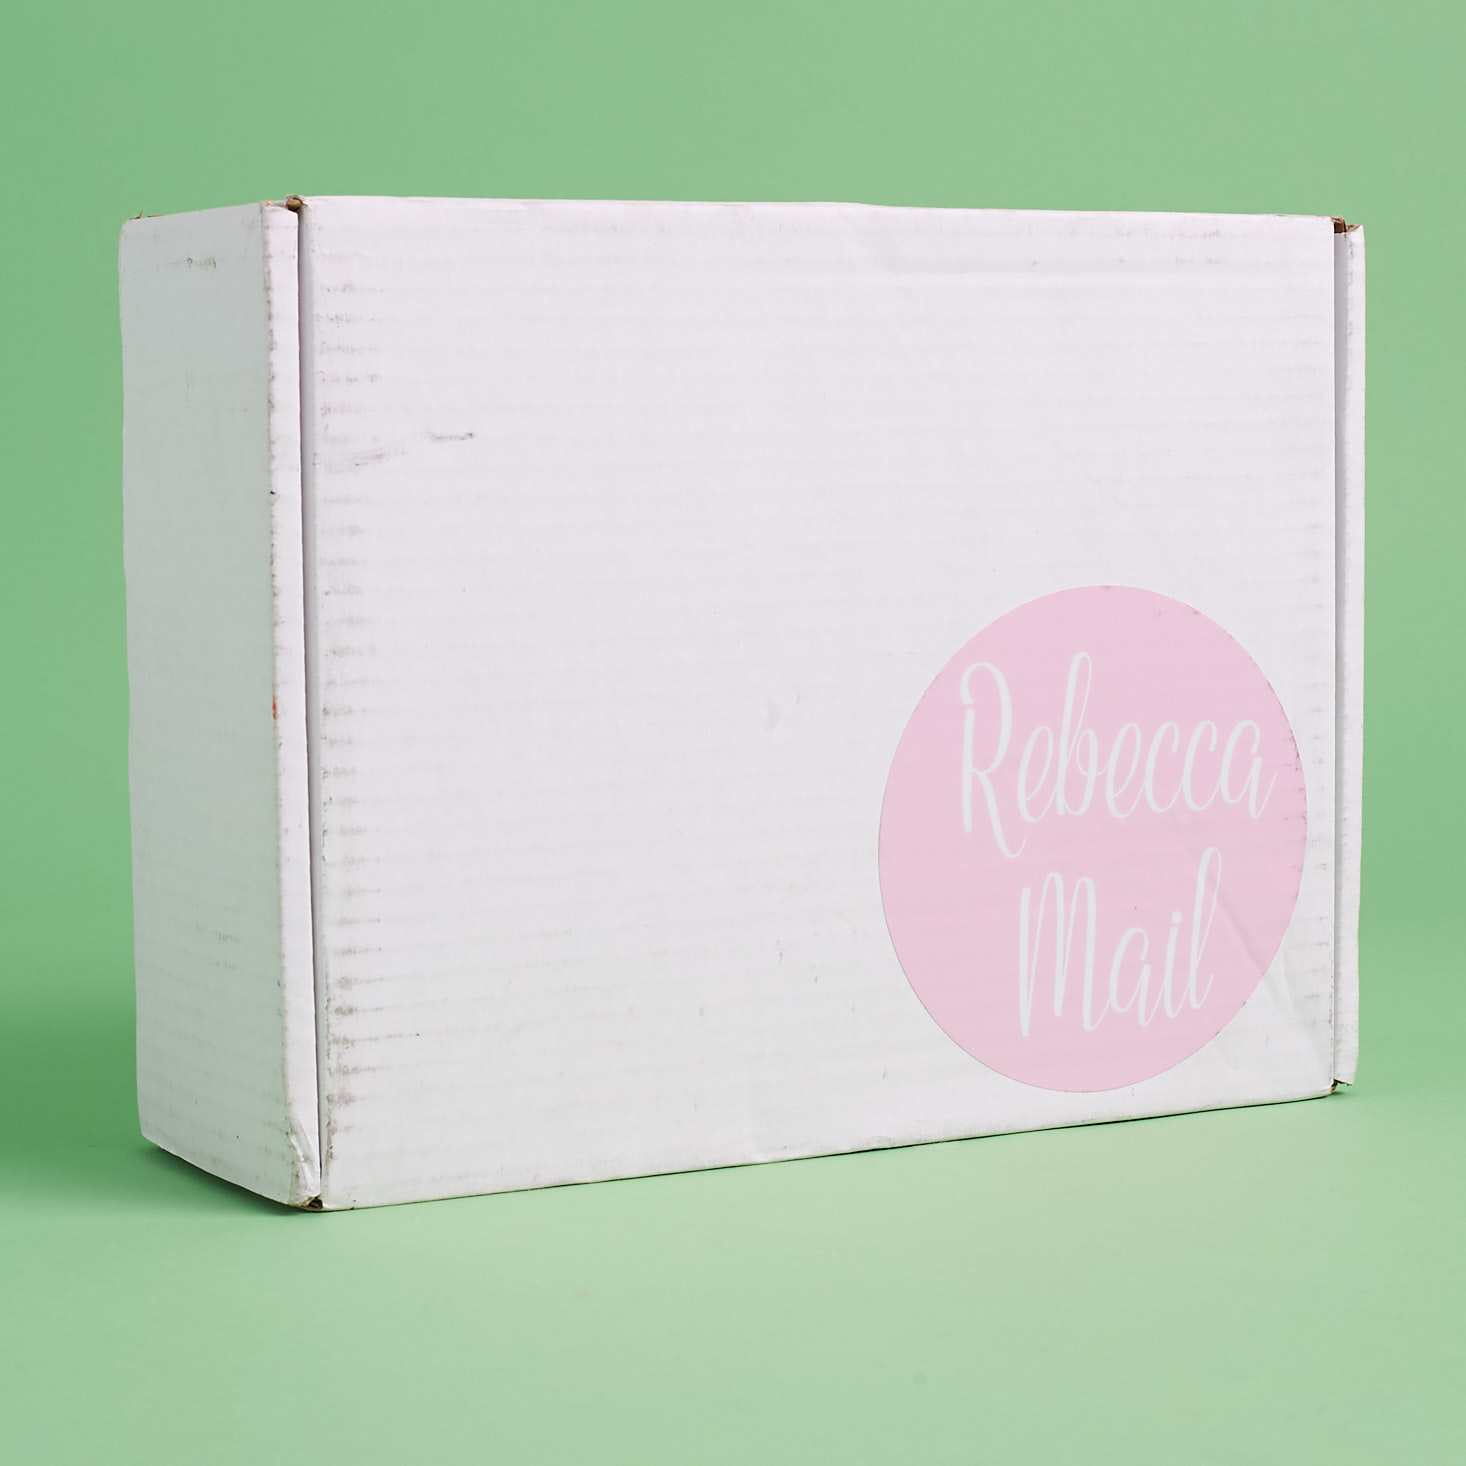 Rebecca Mail Deluxe Lifestyle Box Review – August 2017